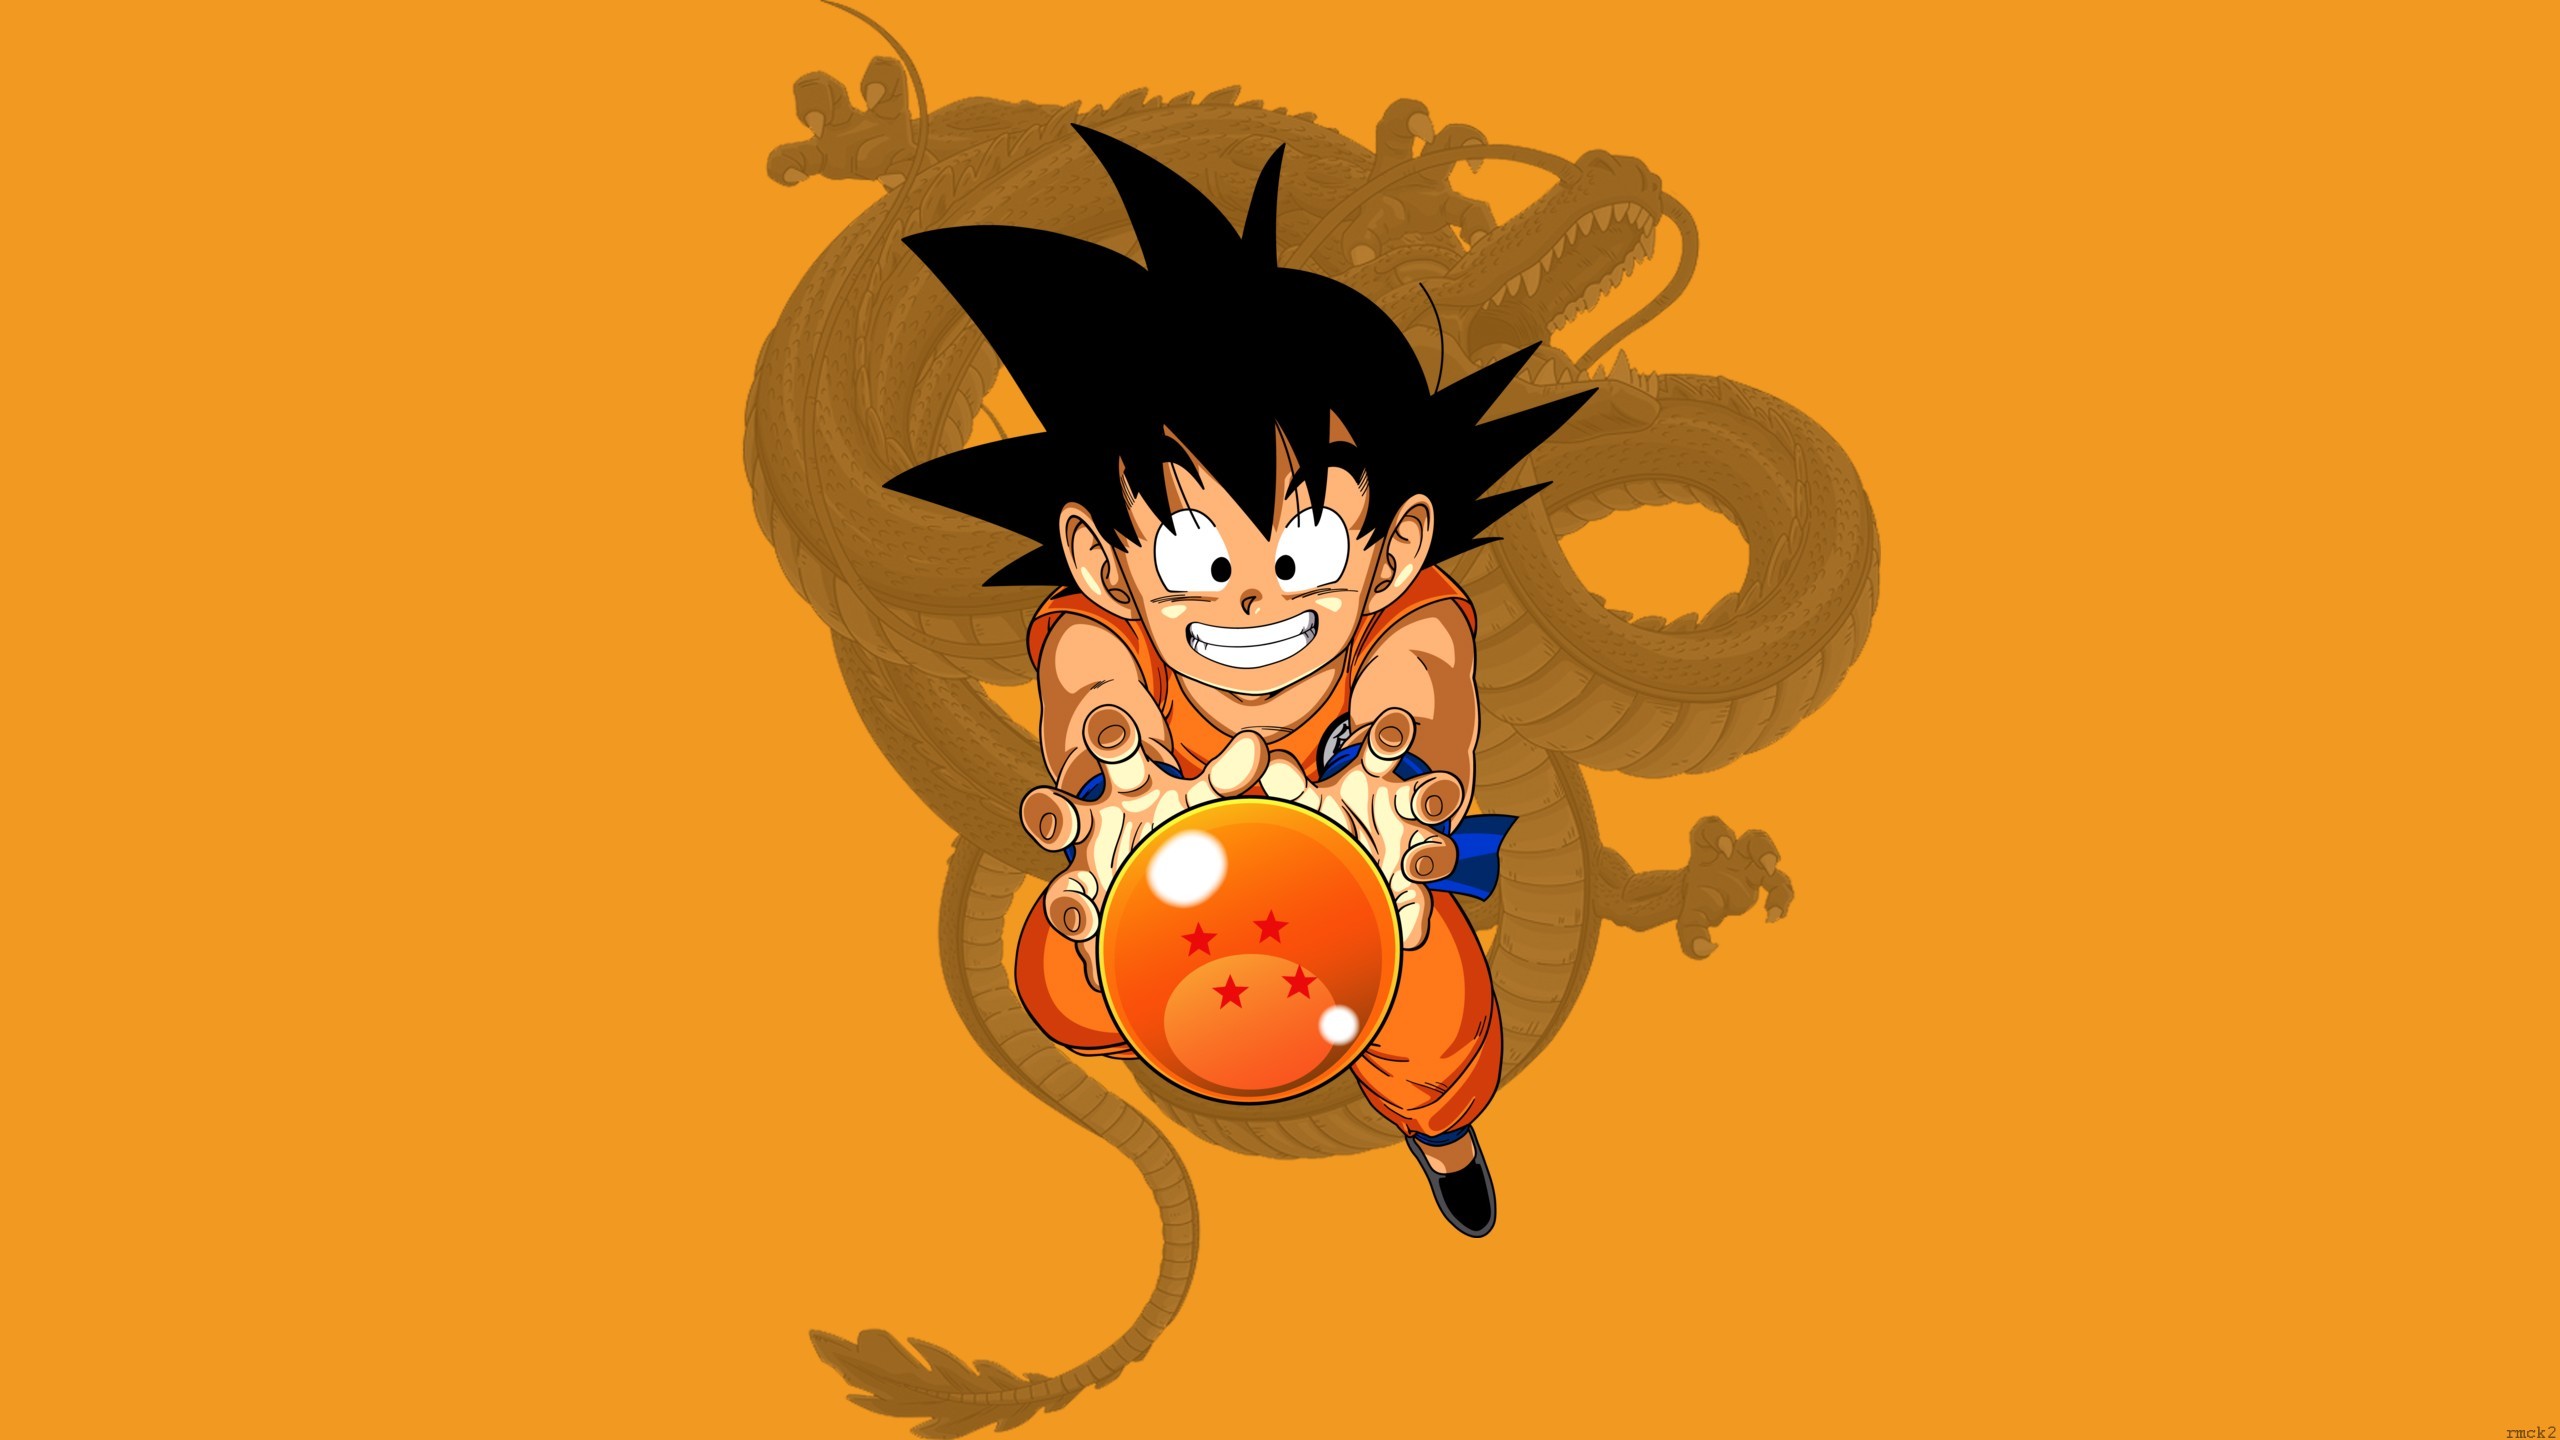 Kid Goku Dragon Ball Z Wallpaper, HD Anime 4K Wallpapers, Images, Photos and Background